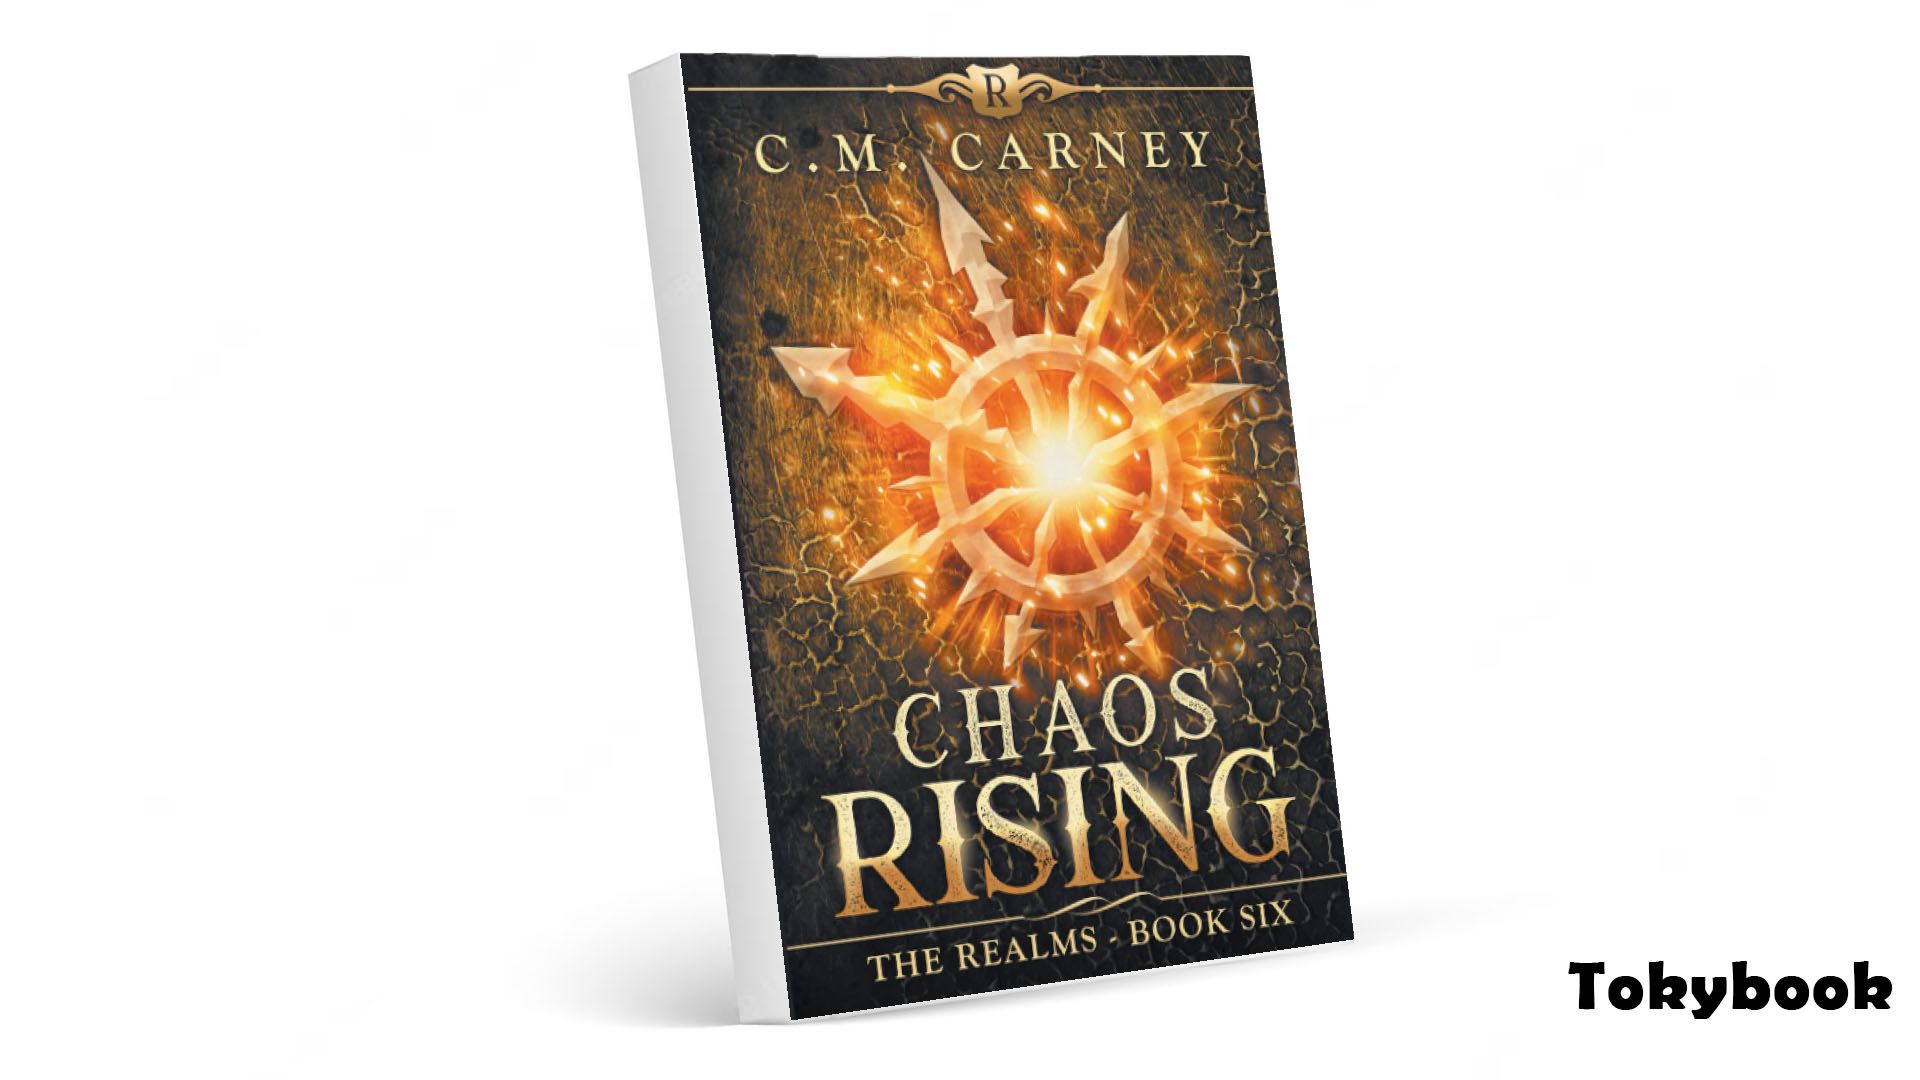 Chaos Rising: The Realms Book Six audiobook - The Realms Series